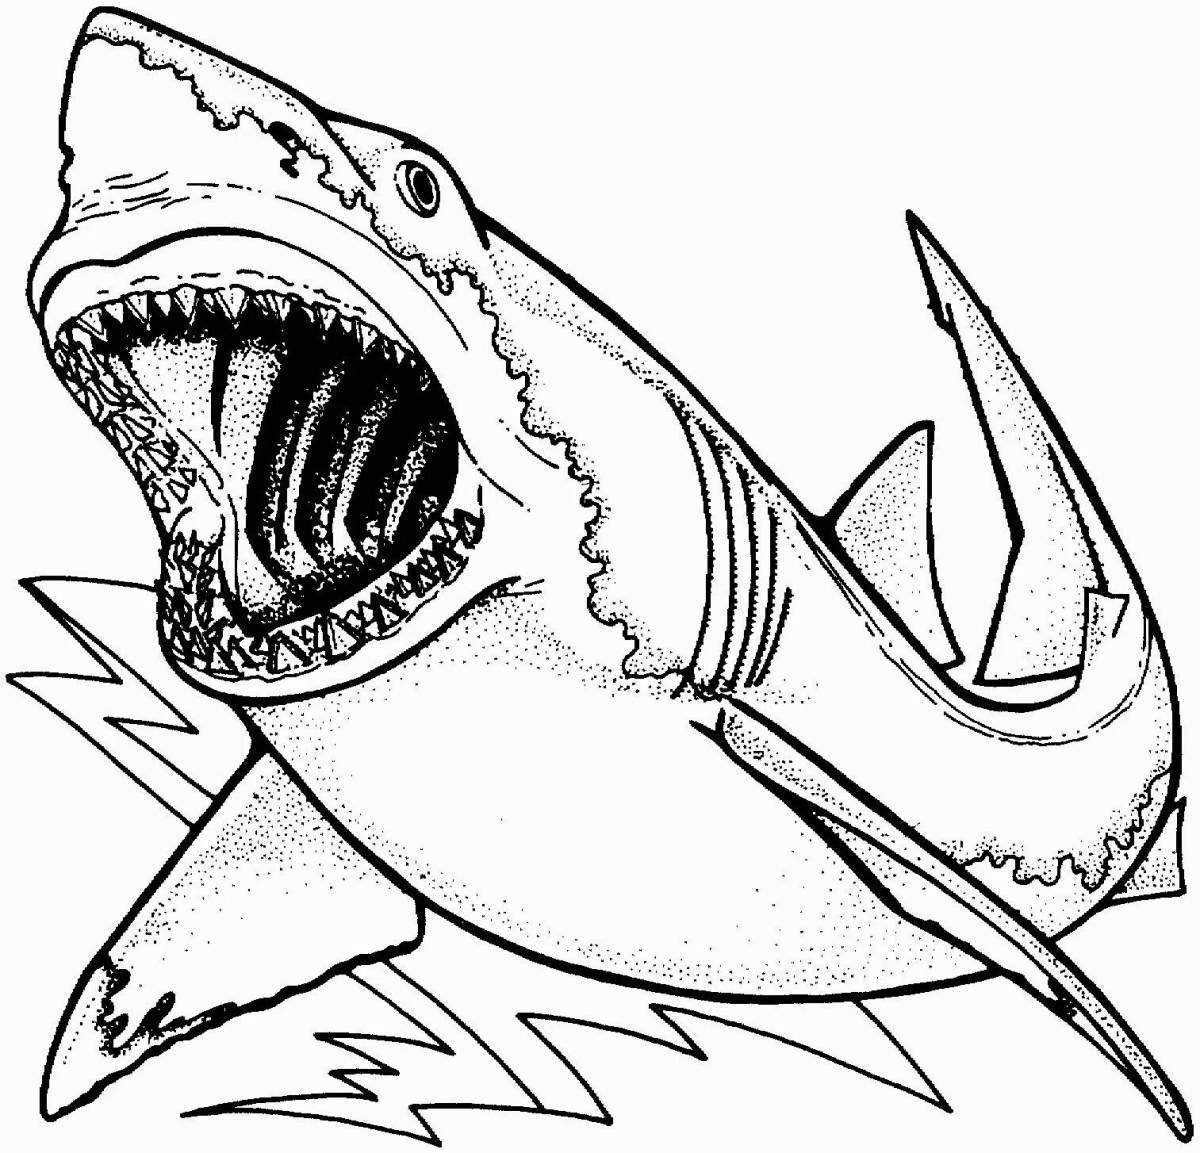 Adorable white shark coloring page